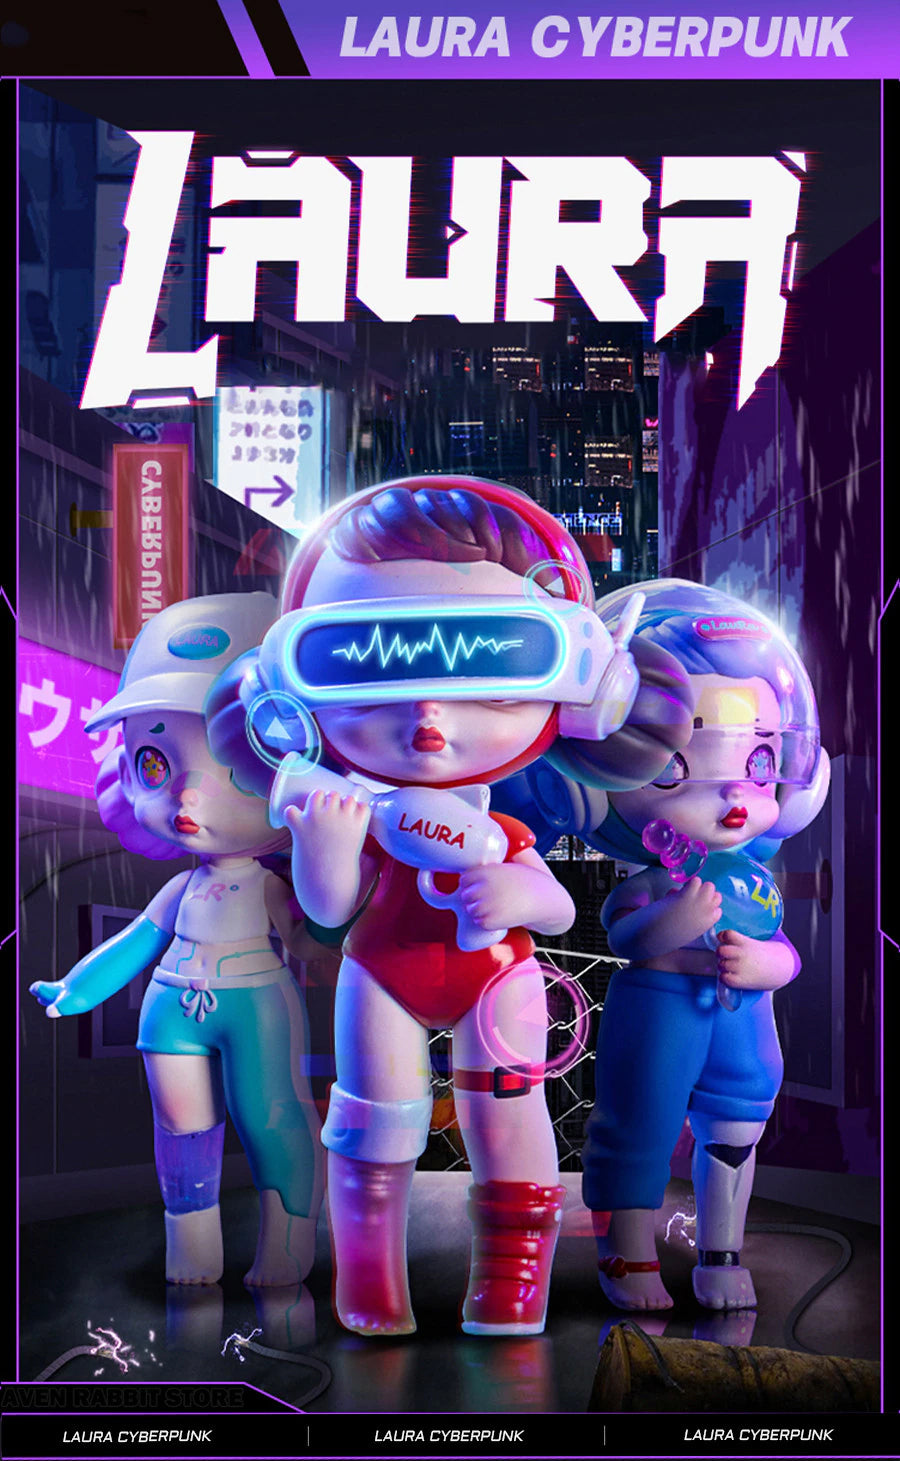 Cartoon characters from Laura - Cyberpunk Blind Box Series, including a girl with a toy gun and a character holding a balloon.